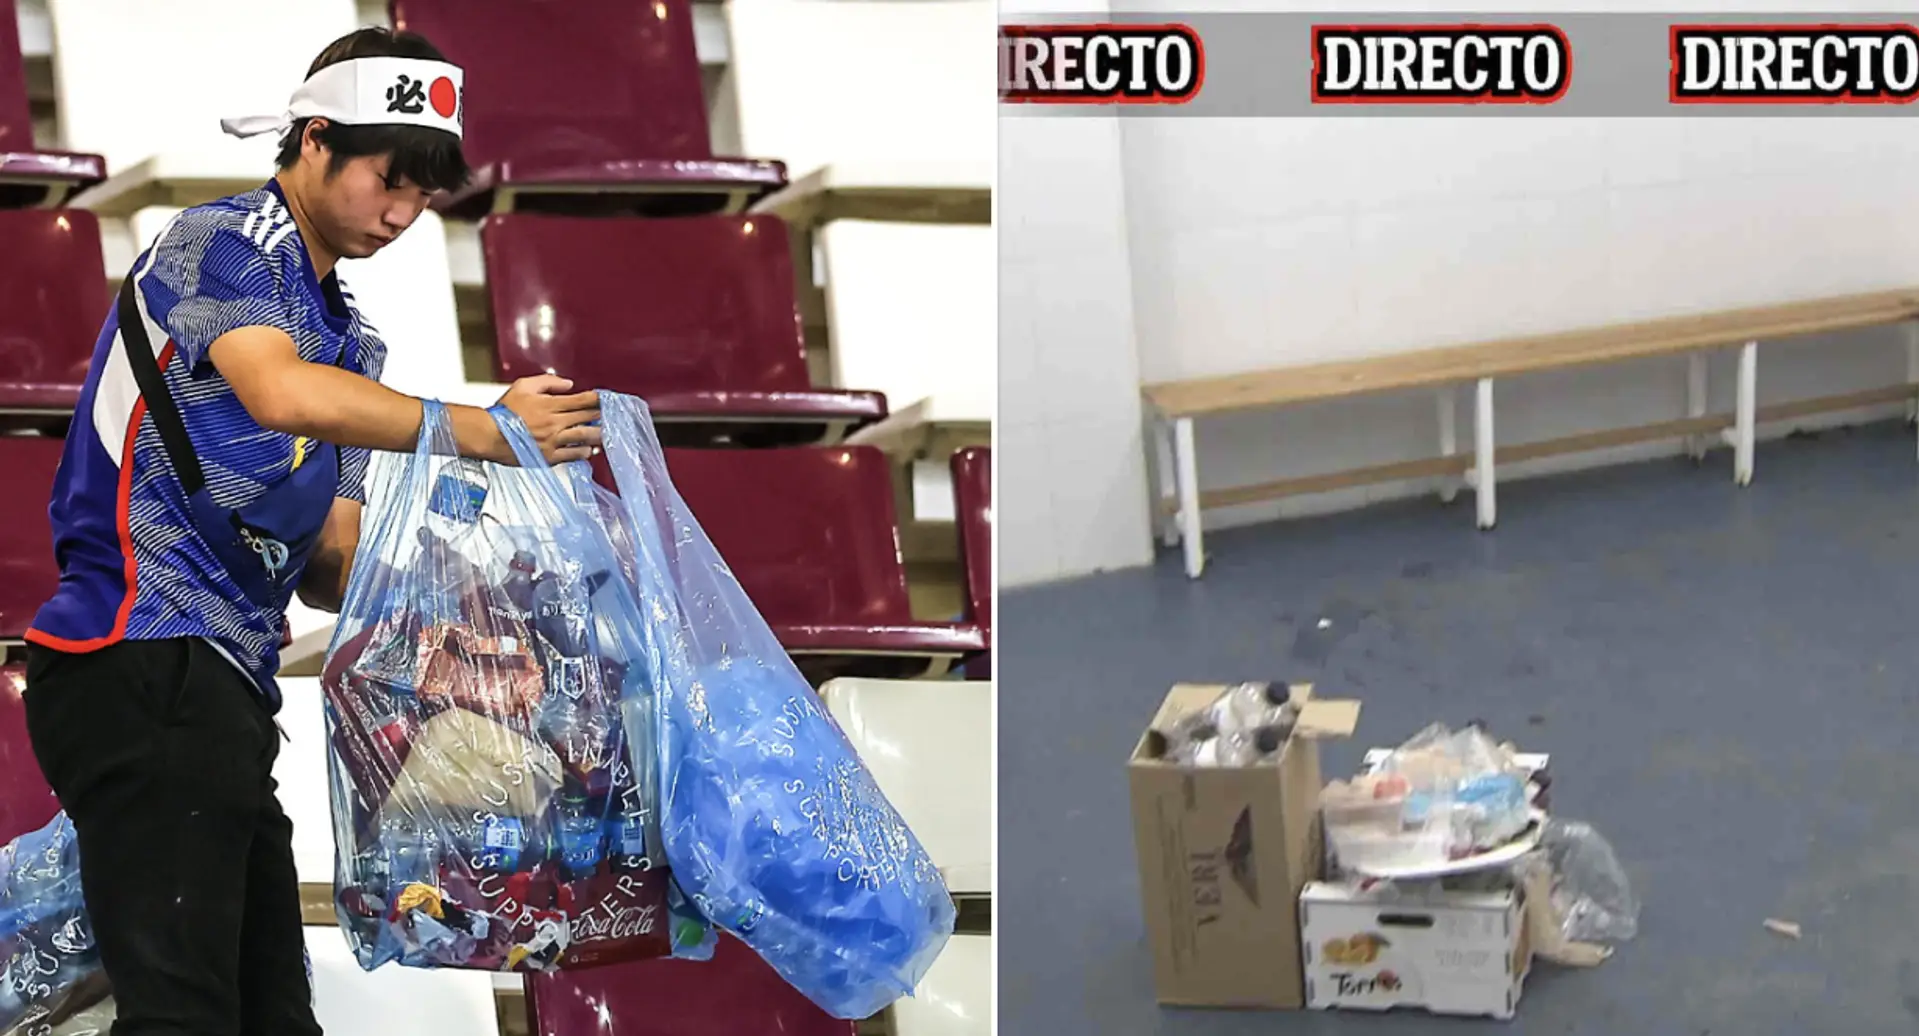 Barca players emulate Japanese as they leave Barbastro dressing room spotless after game